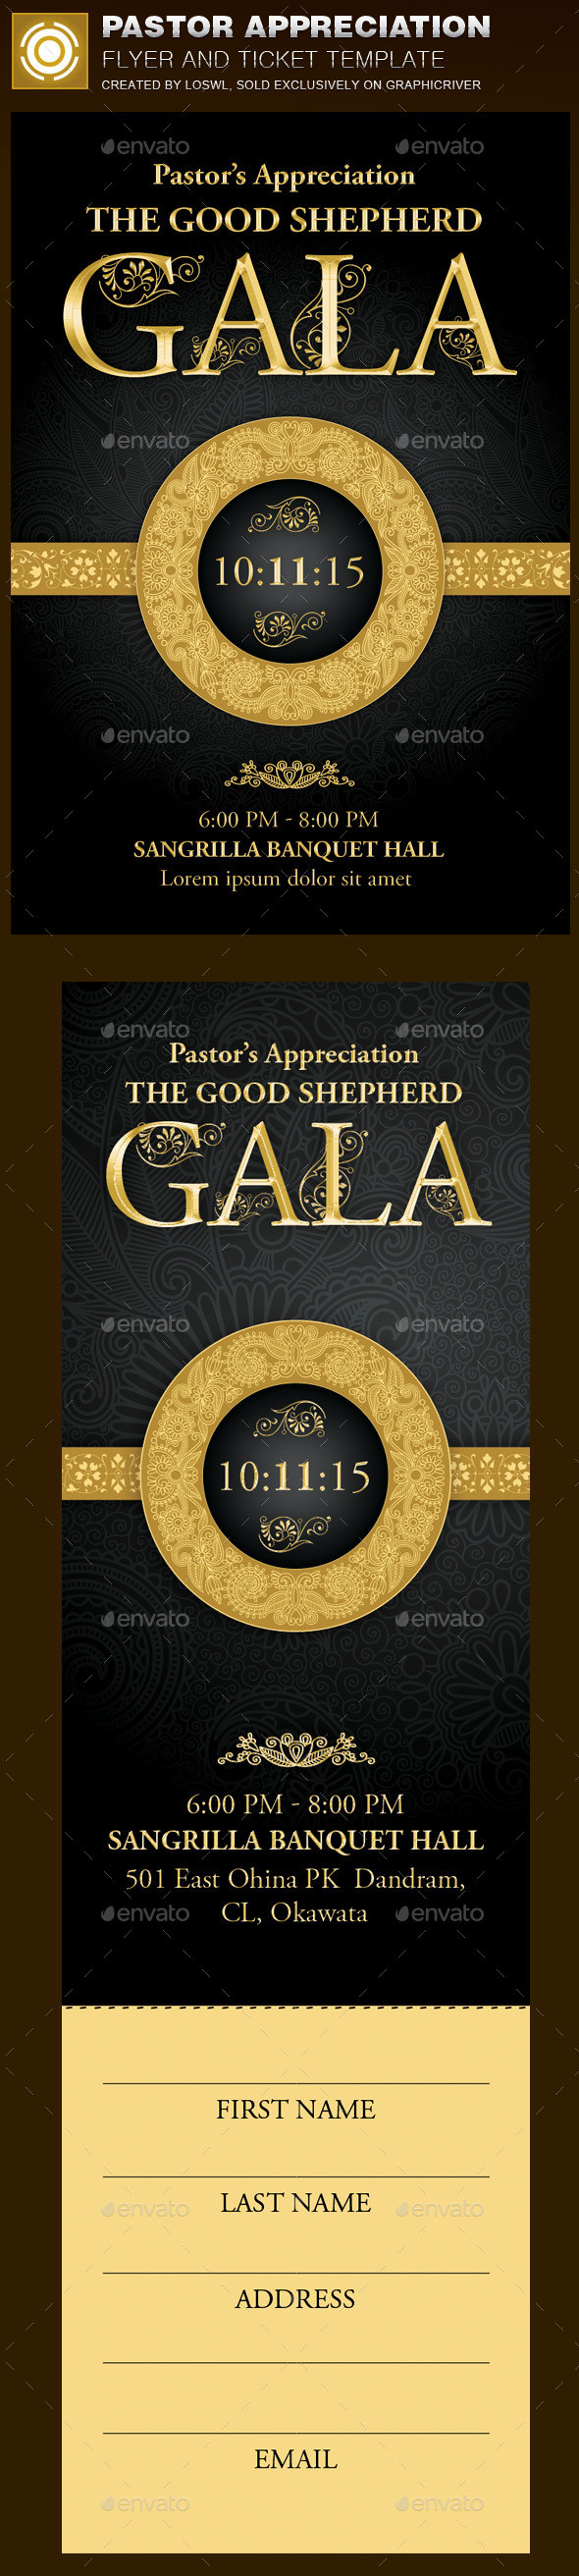 Pastor appreciation flyer template image preview